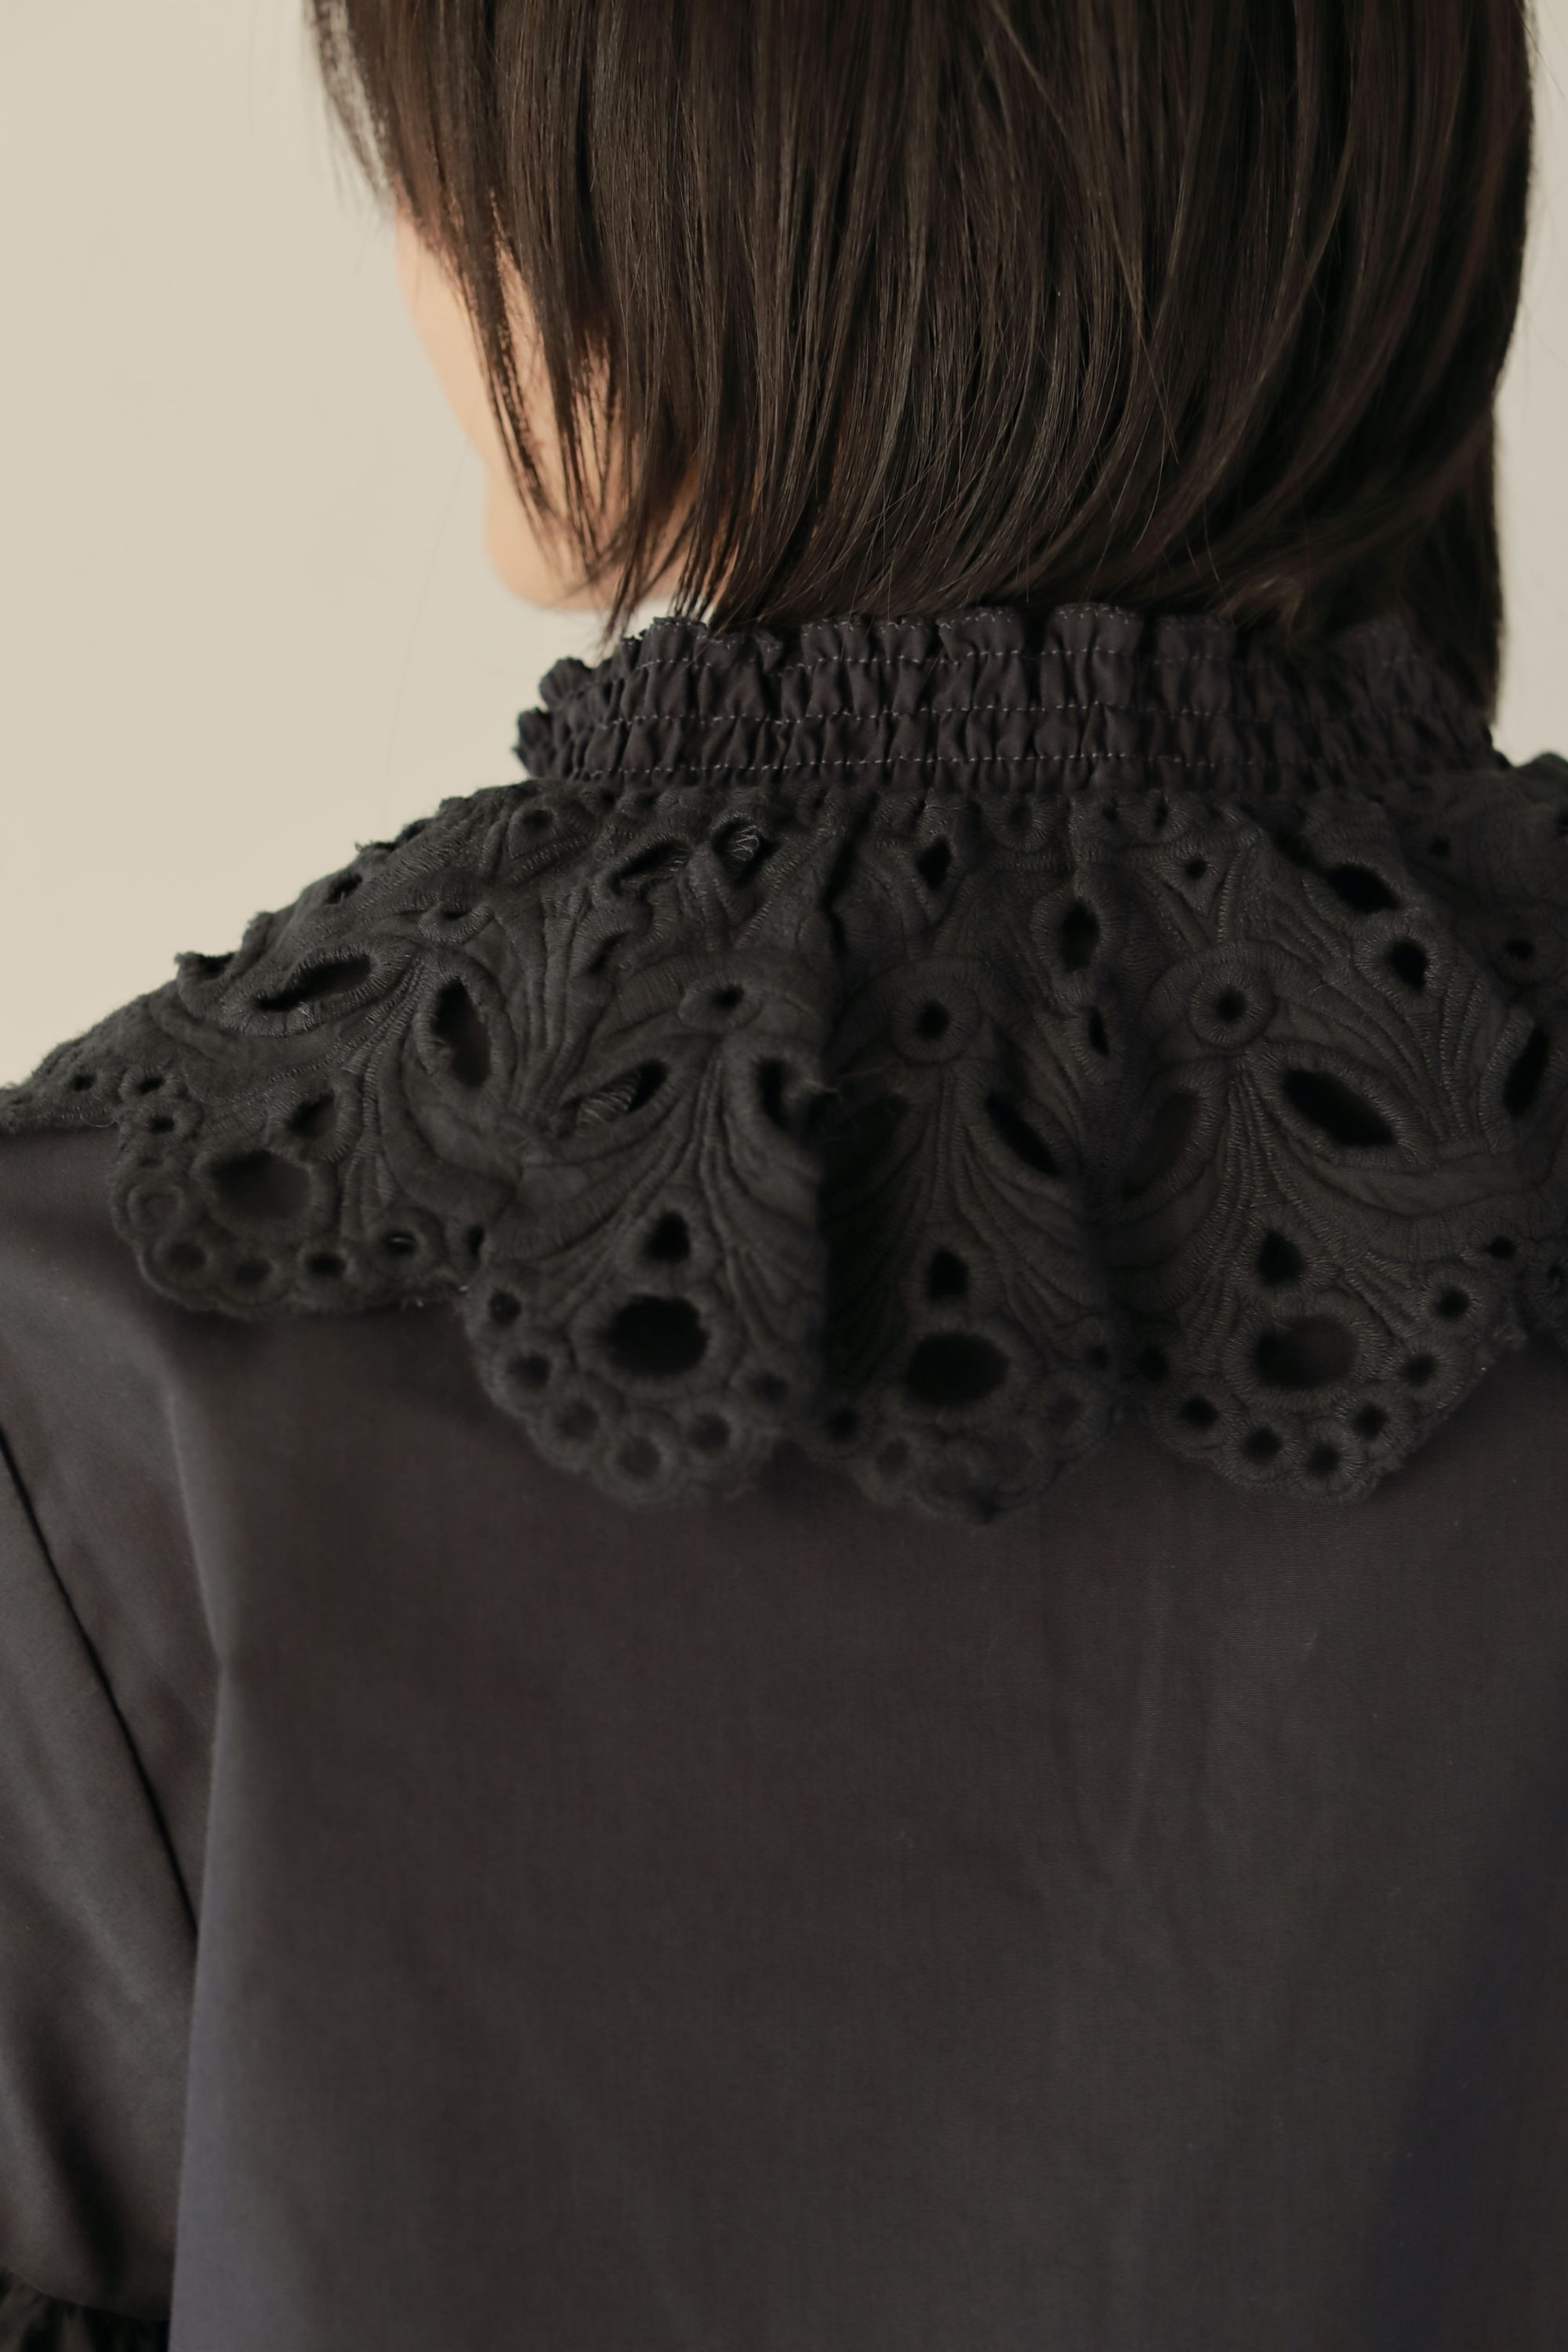 EMBROIDERY COLLAR BLOUSE